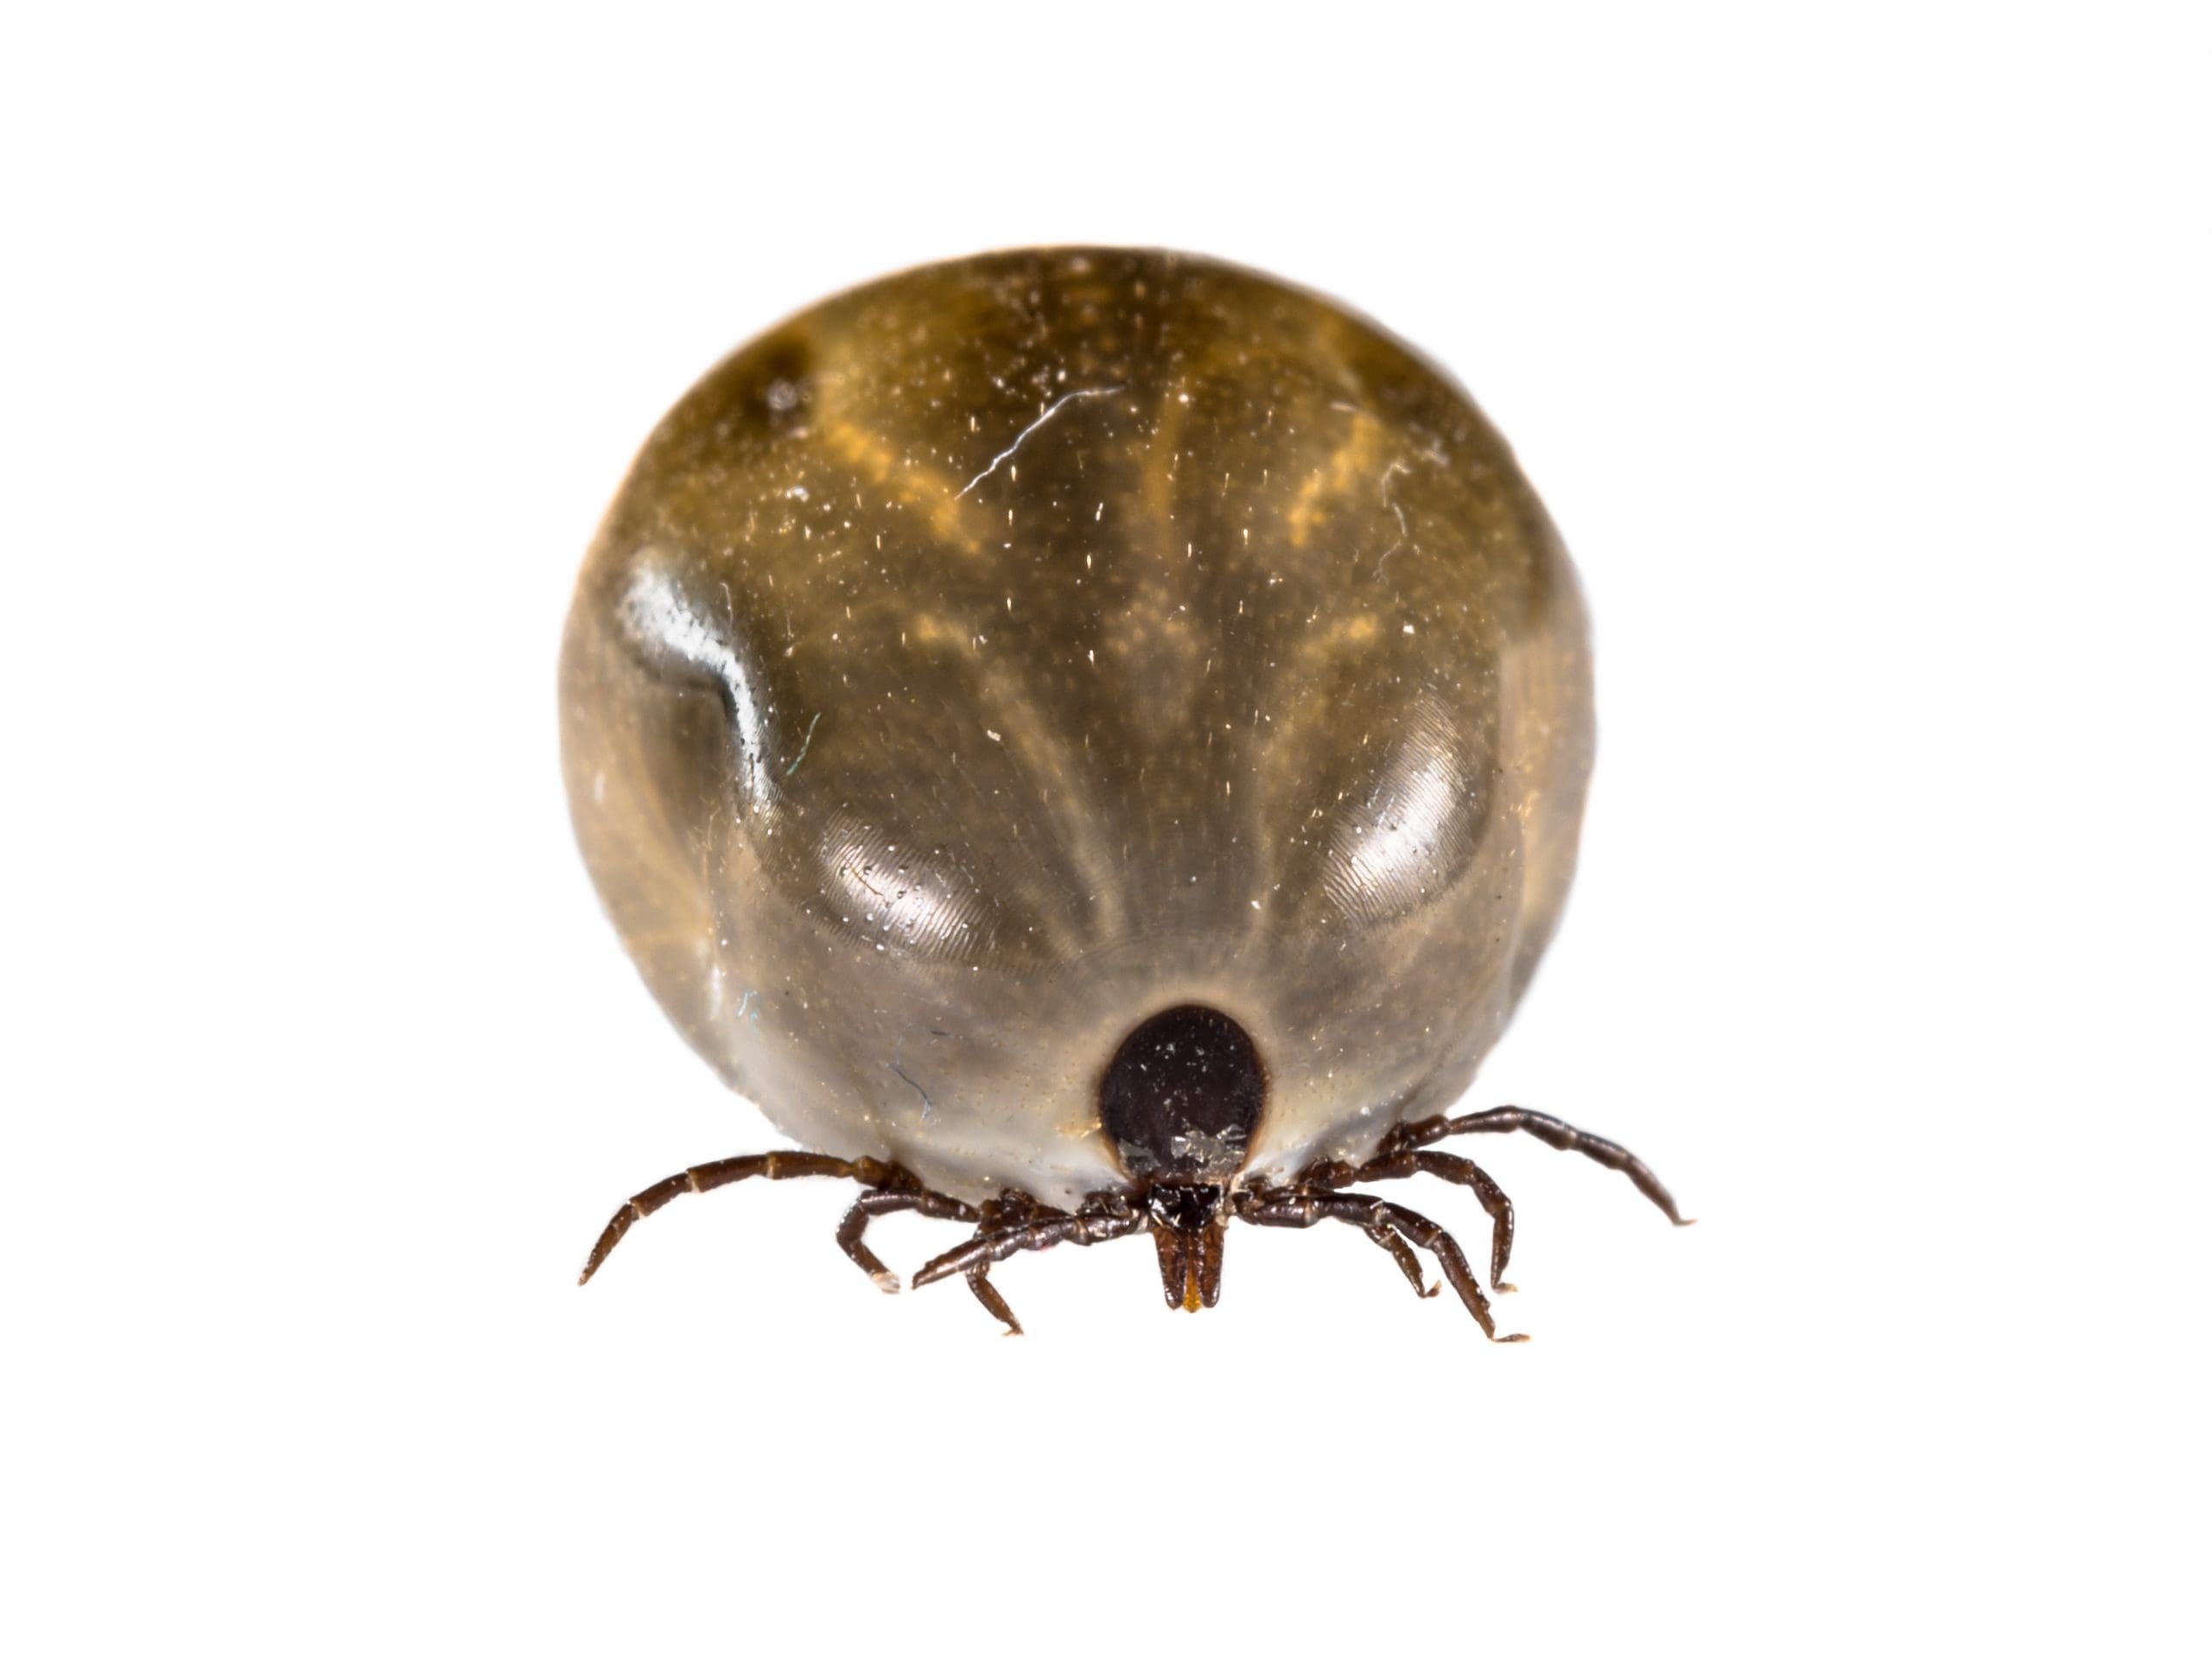 Seekonk Castor Bean Tick (Ixodes ricinus) sucked full of blood and ready to reproduce. This animal is causative agent of Lyme disease and tick-borne encephalitis